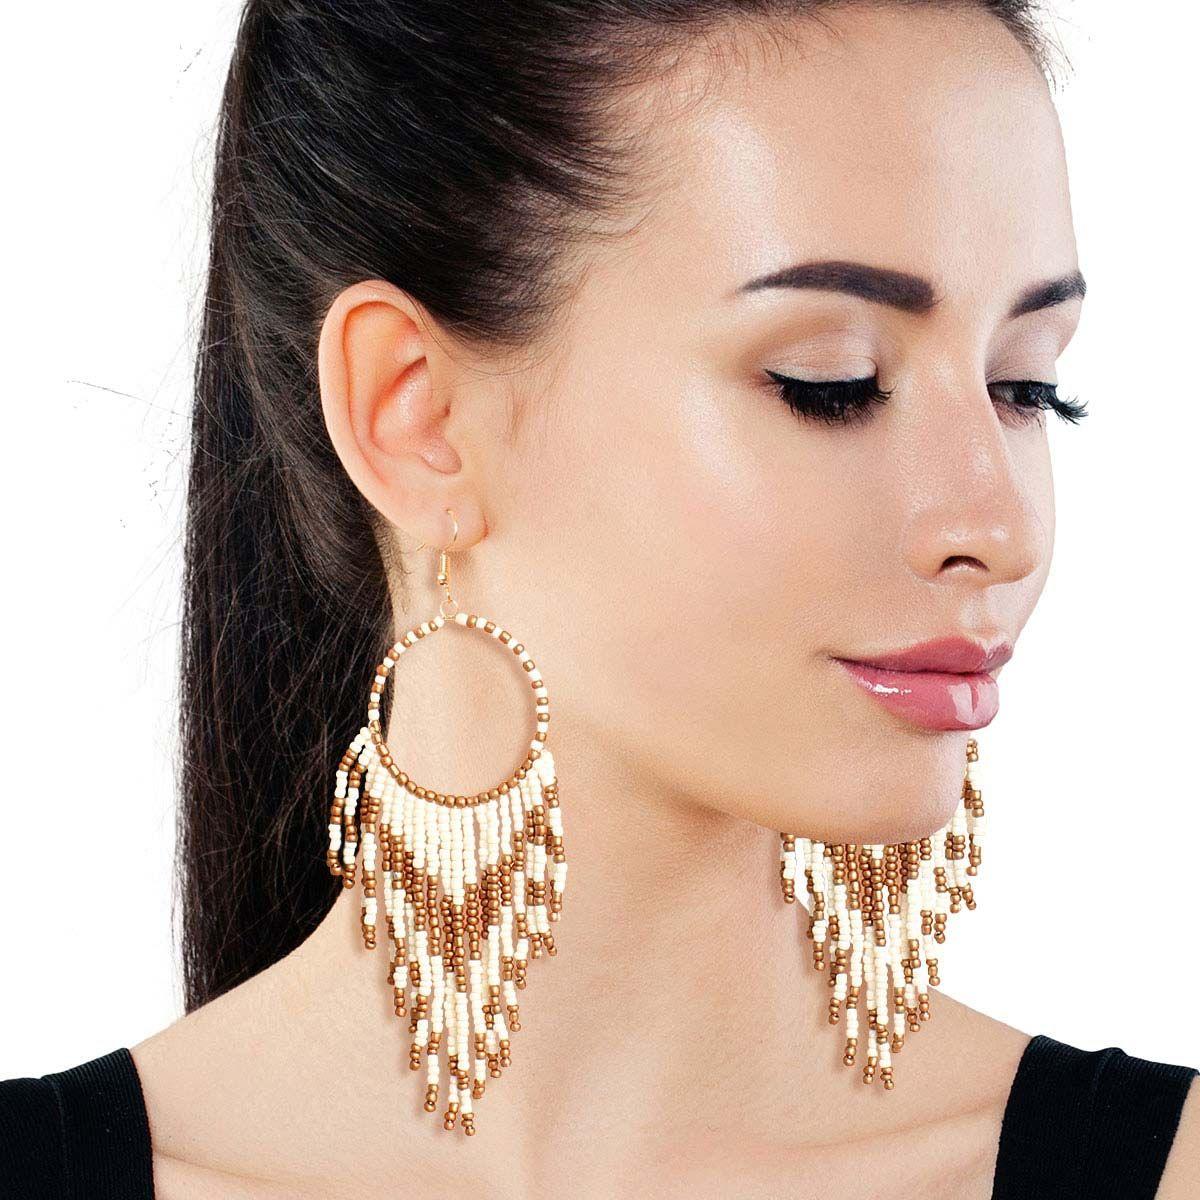 Make a Statement with Stunning Cream & Gold Dangle Earrings